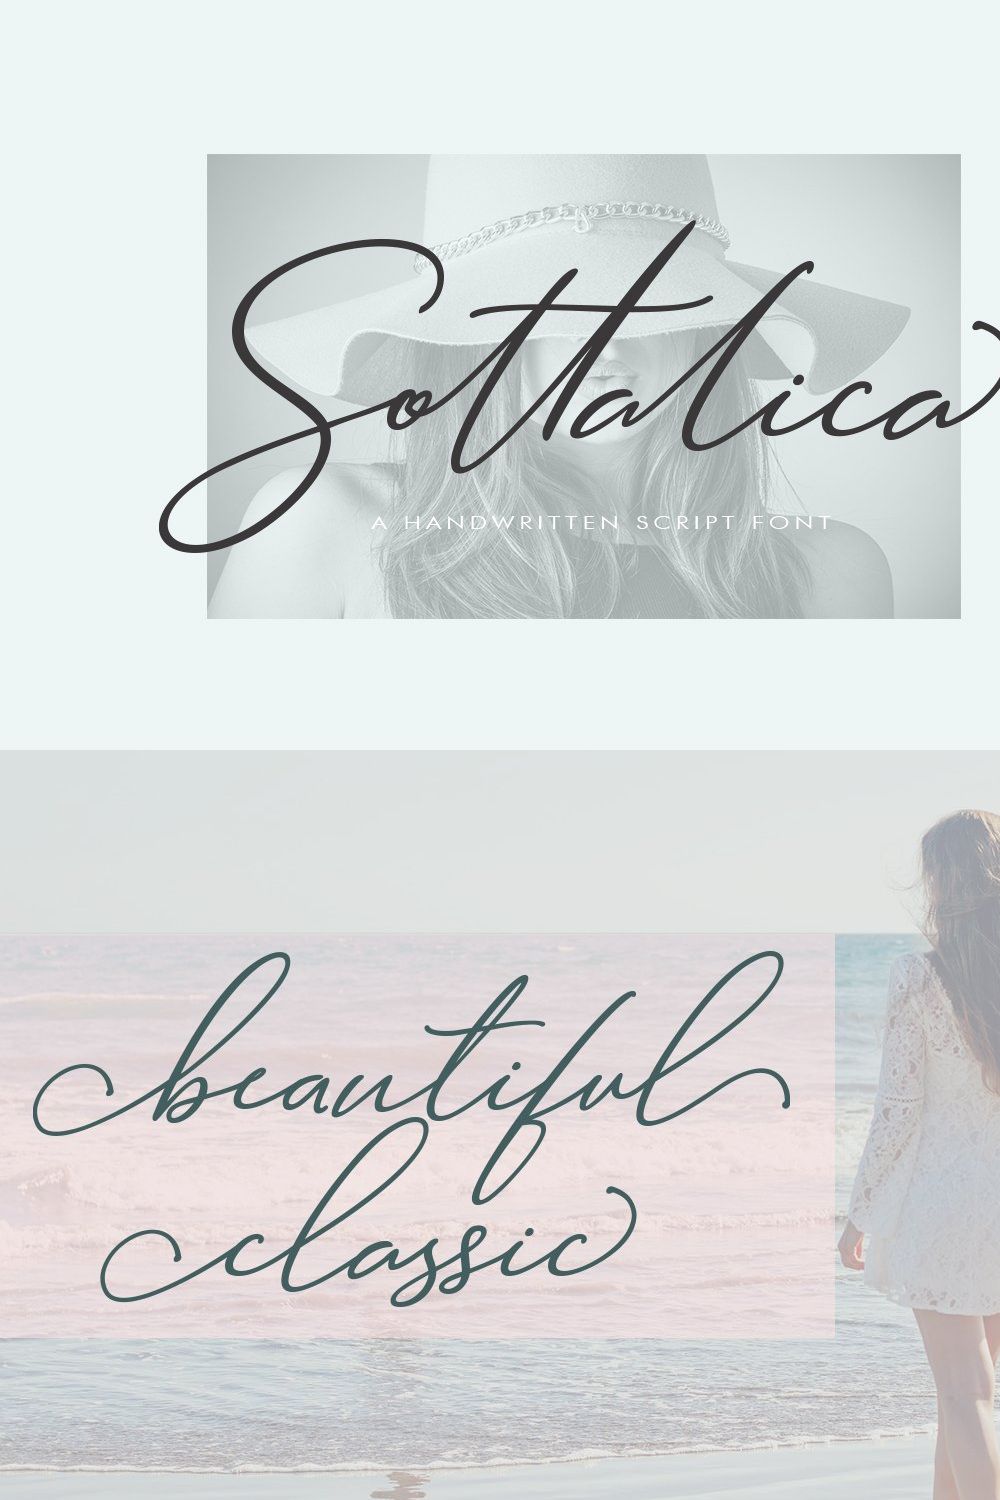 Sottalica pinterest preview image.